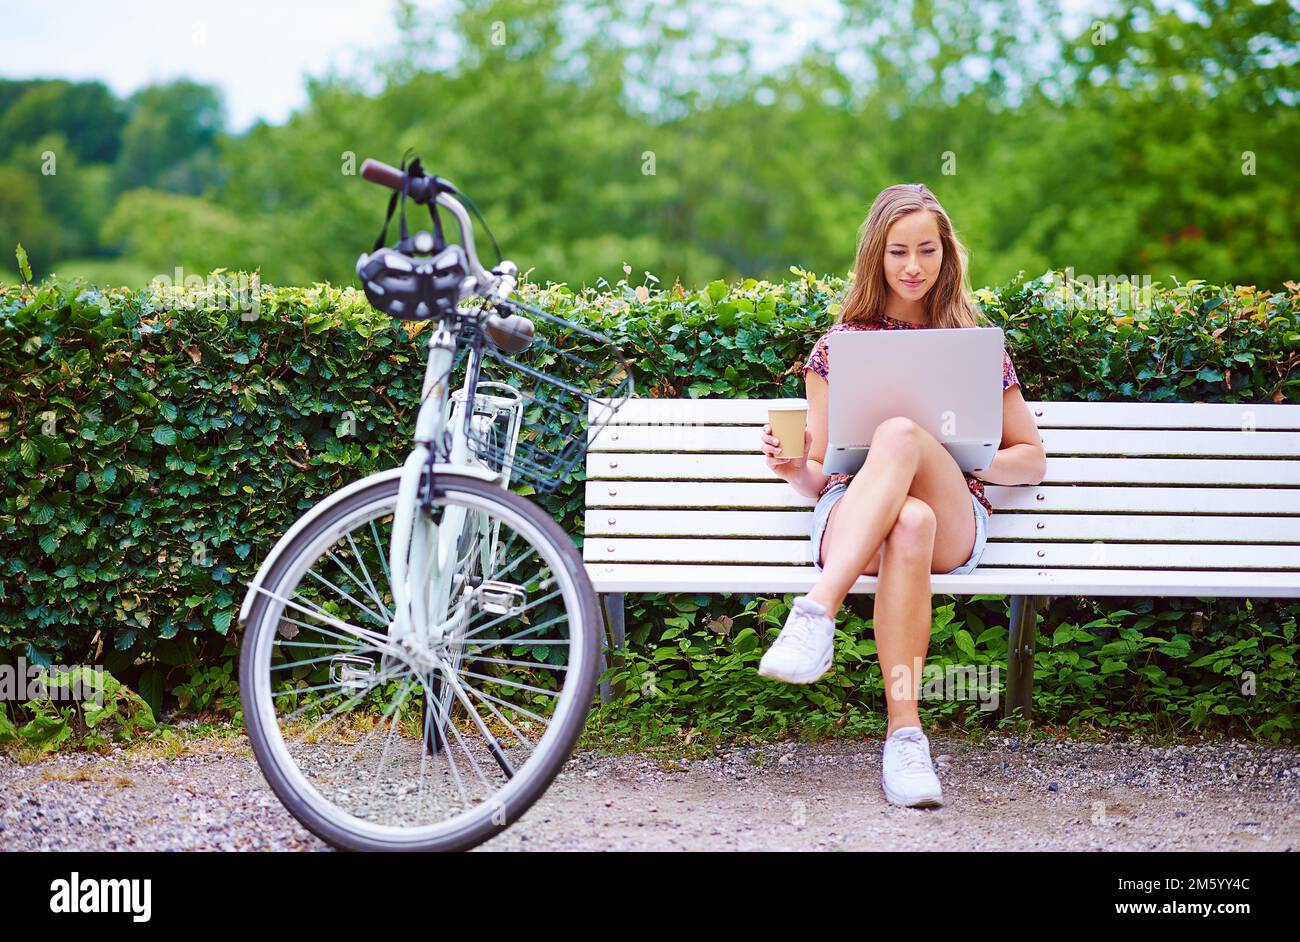 Blogging in the park. a young woman using a laptop on a bench while out for a cycle in the park. Stock Photo